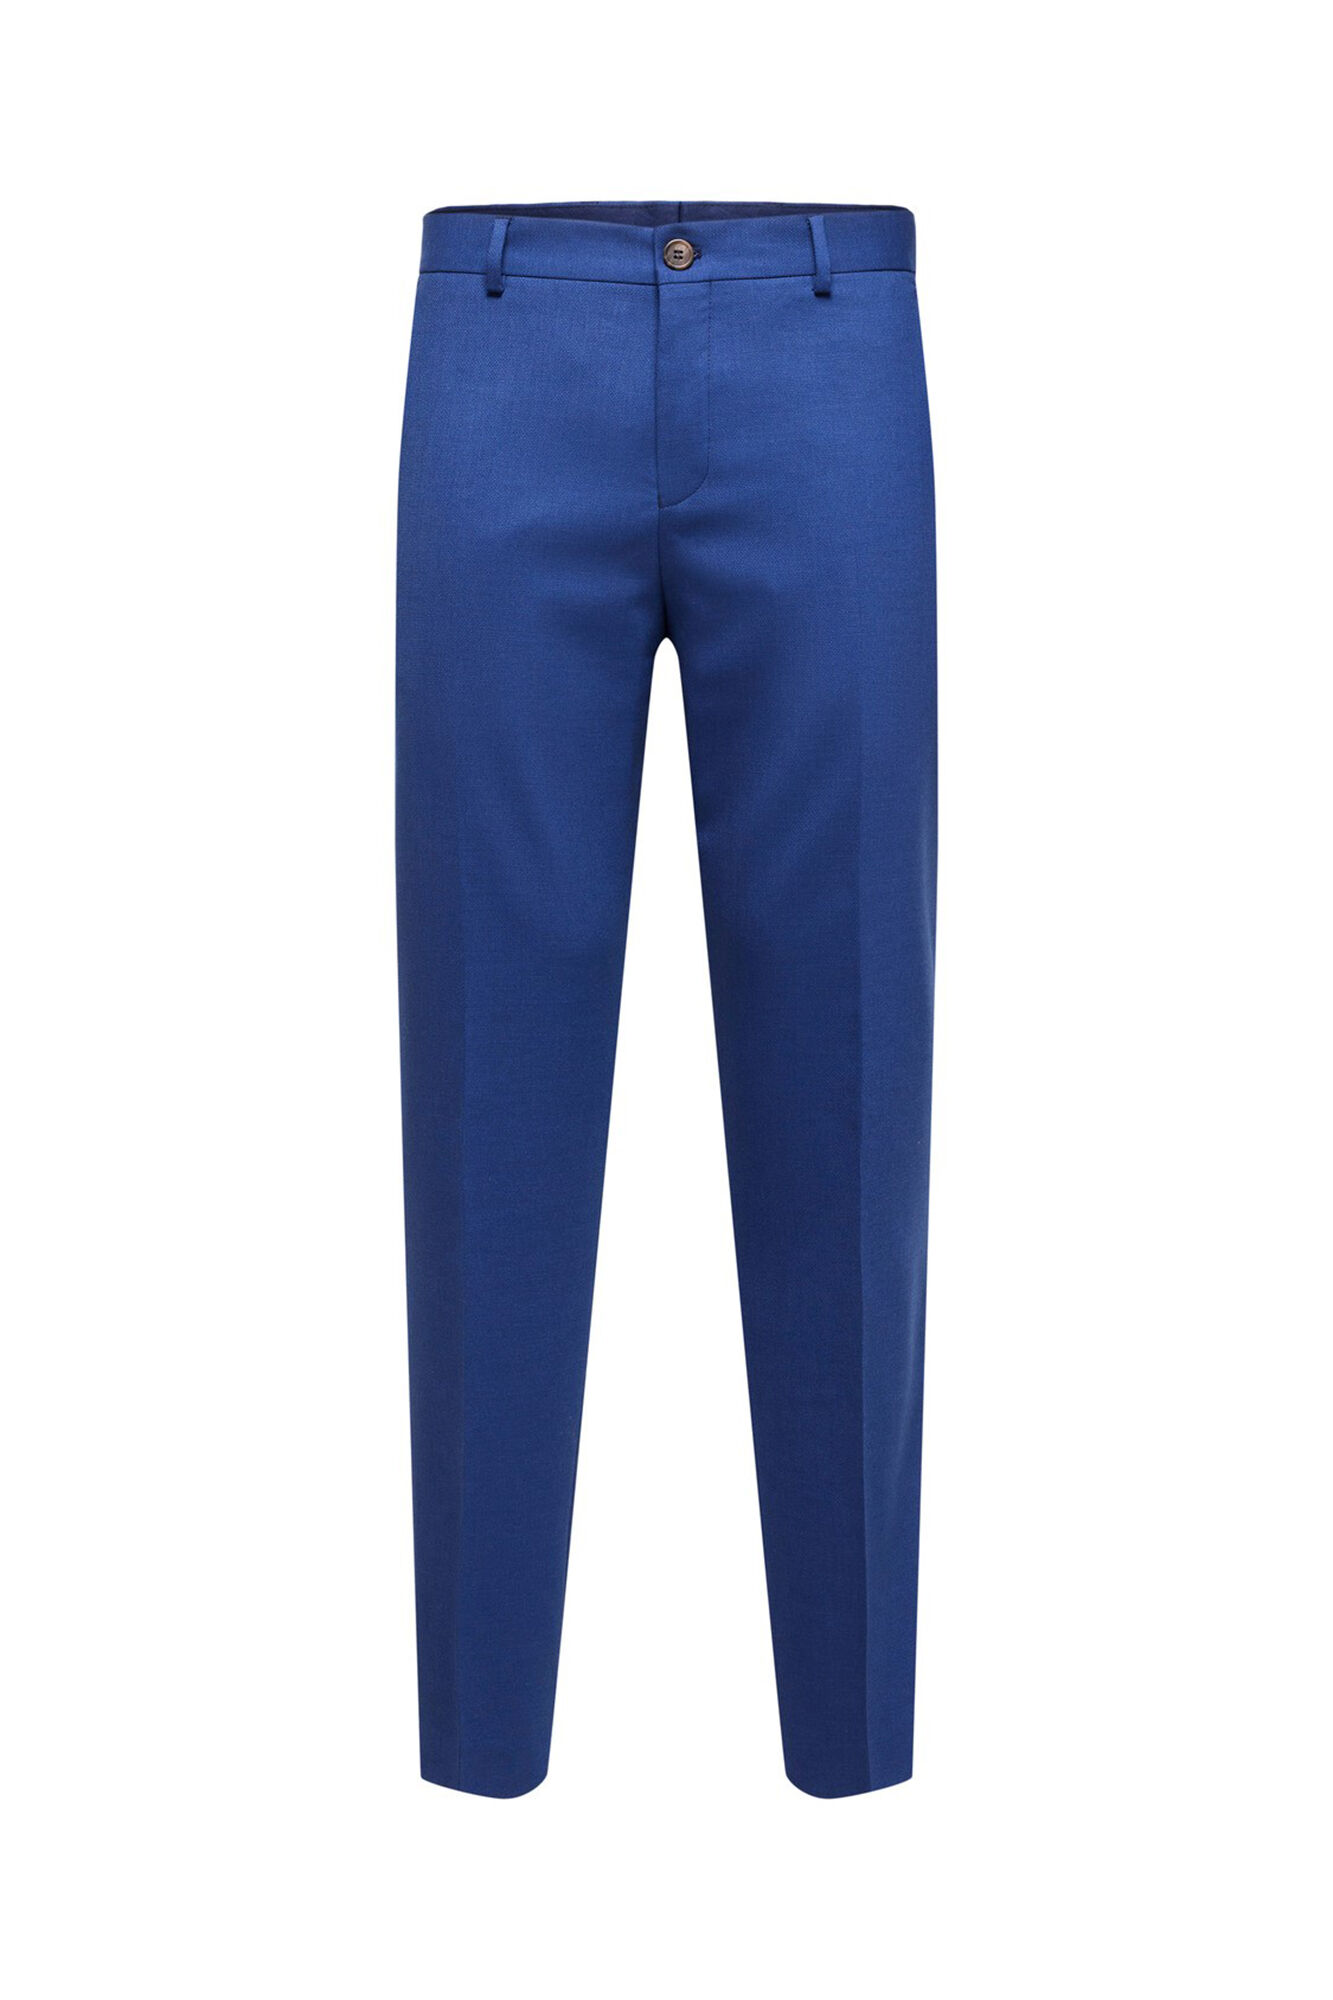 Dunhill - Navy Slim-Fit Mulberry Silk Suit Trousers - Blue Dunhill